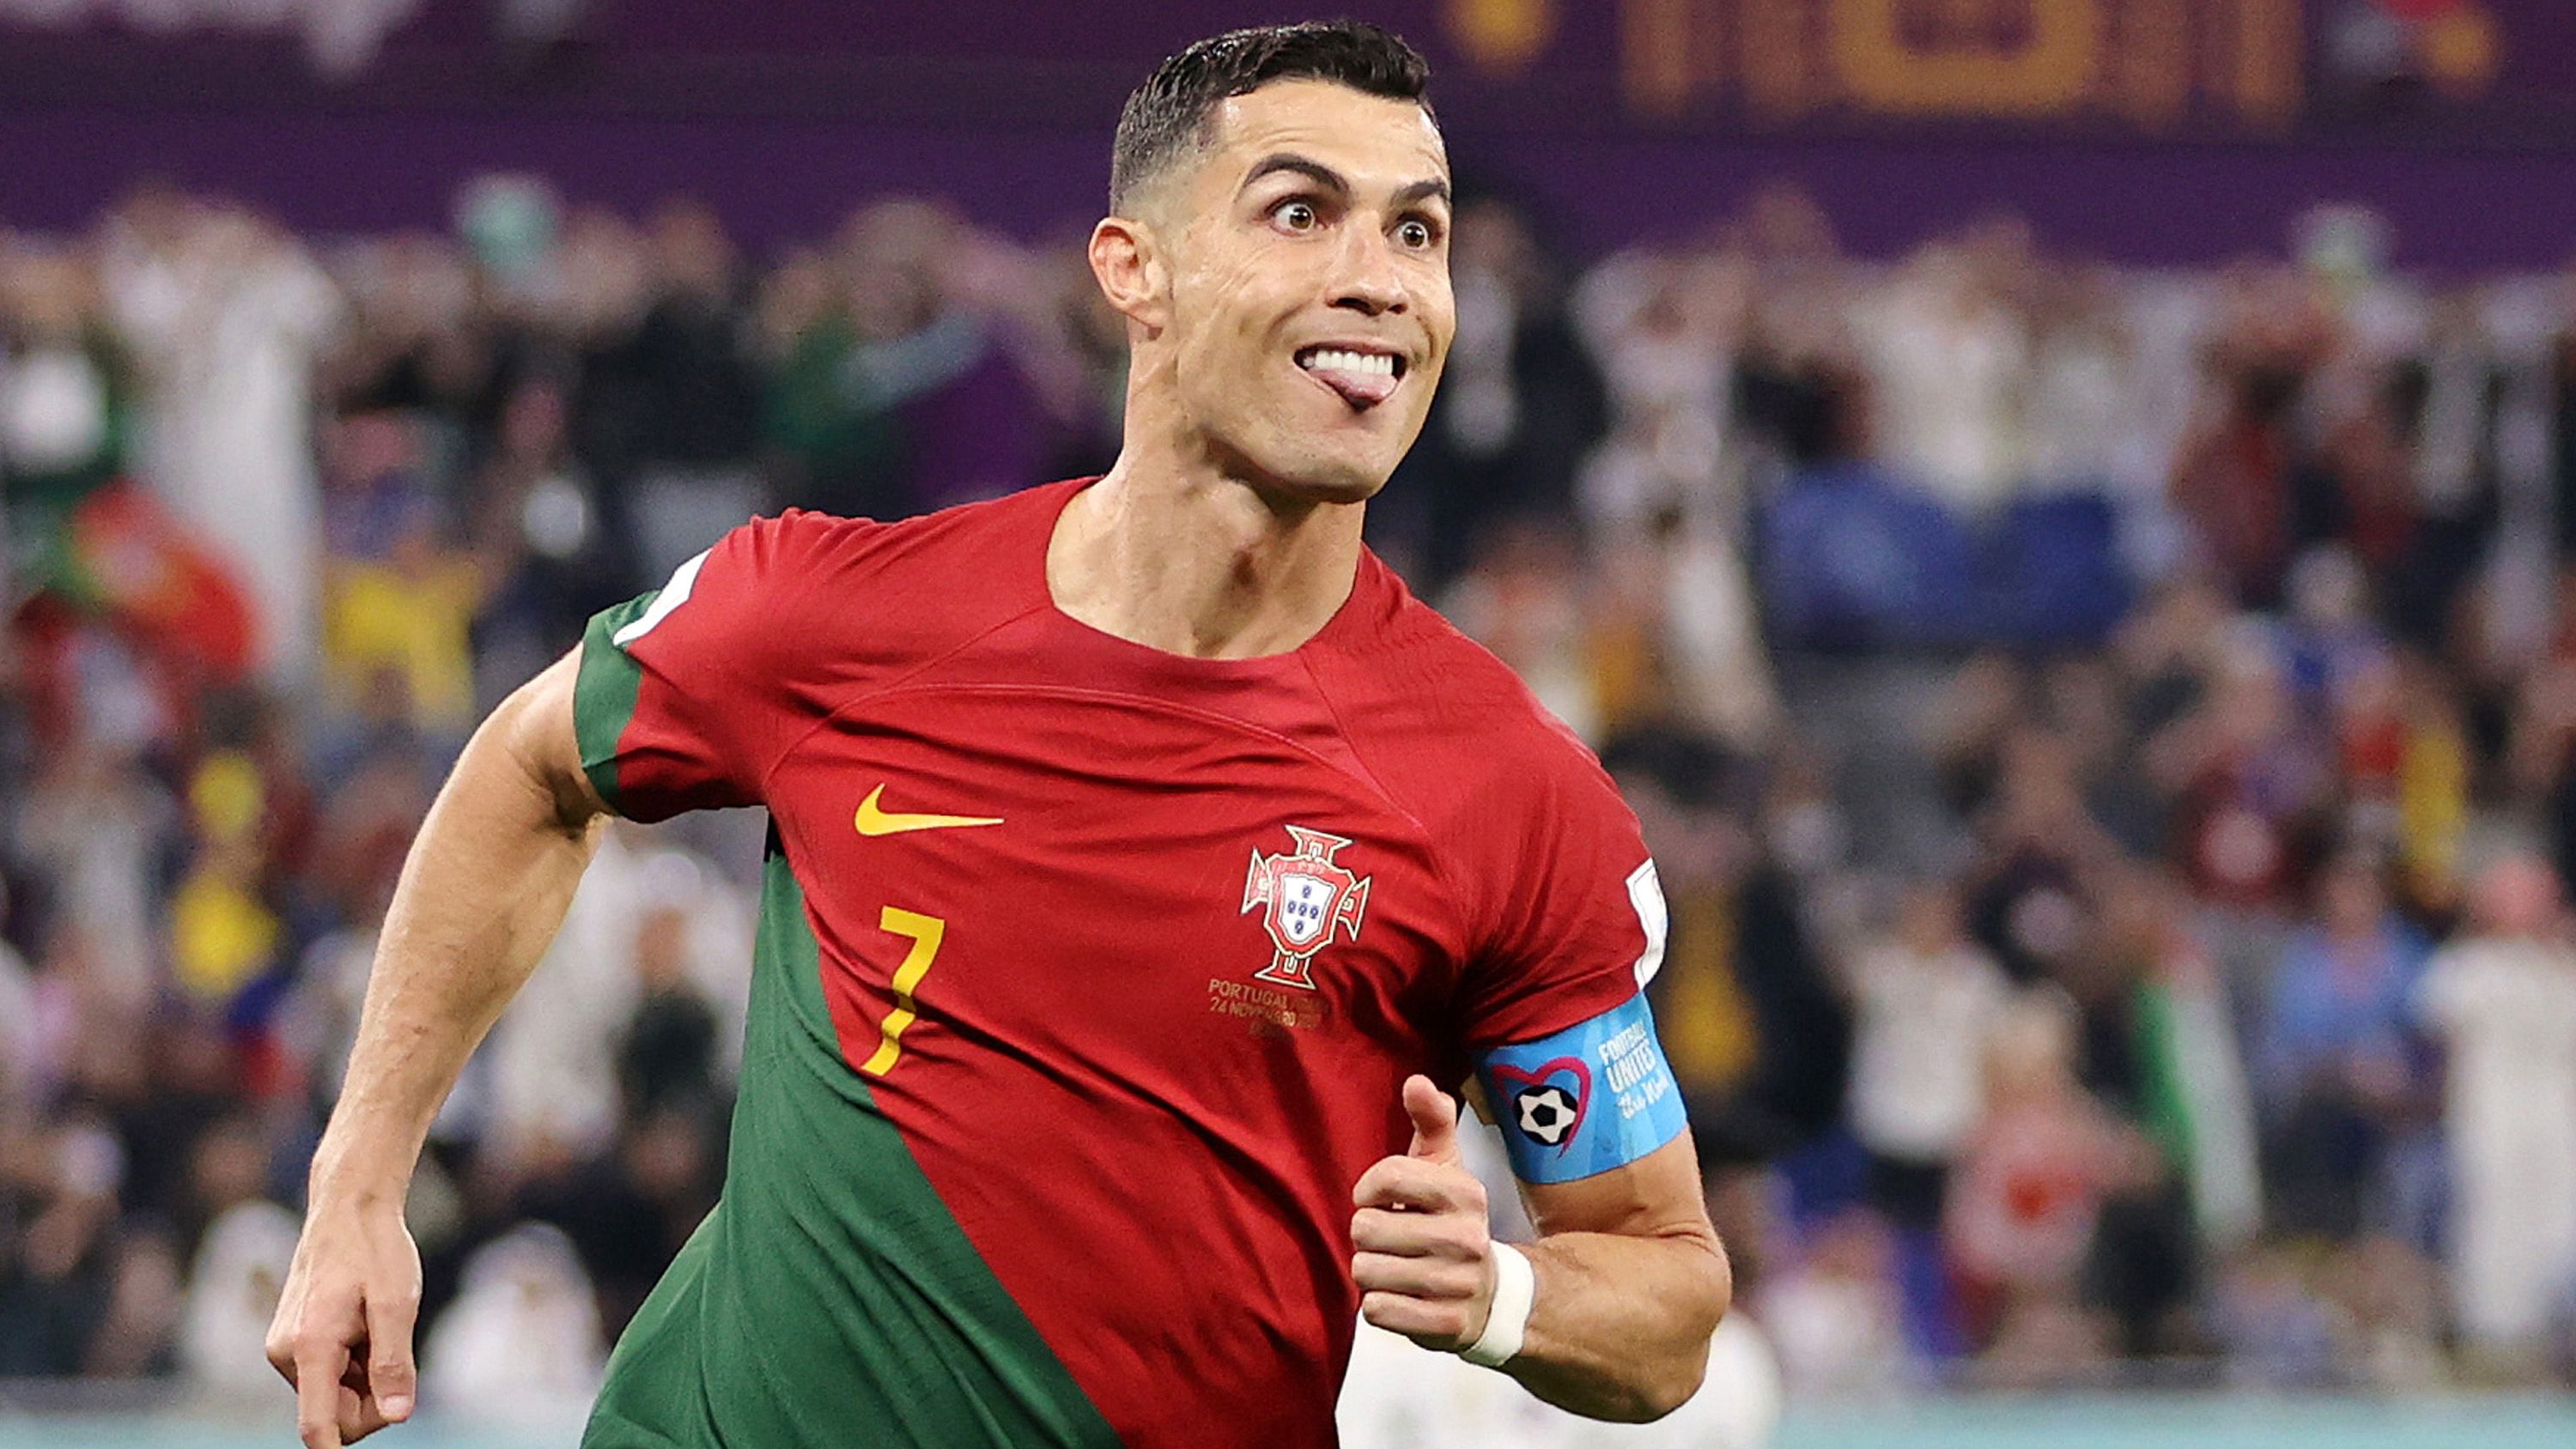 Cristiano Ronaldo of Portugal celebrates after scoring their team&#x27;s first goal via a penalty during the FIFA World Cup Qatar 2022 Group H match between Portugal and Ghana at Stadium 974 on November 24, 2022 in Doha, Qatar. (Photo by Clive Brunskill/Getty Images)